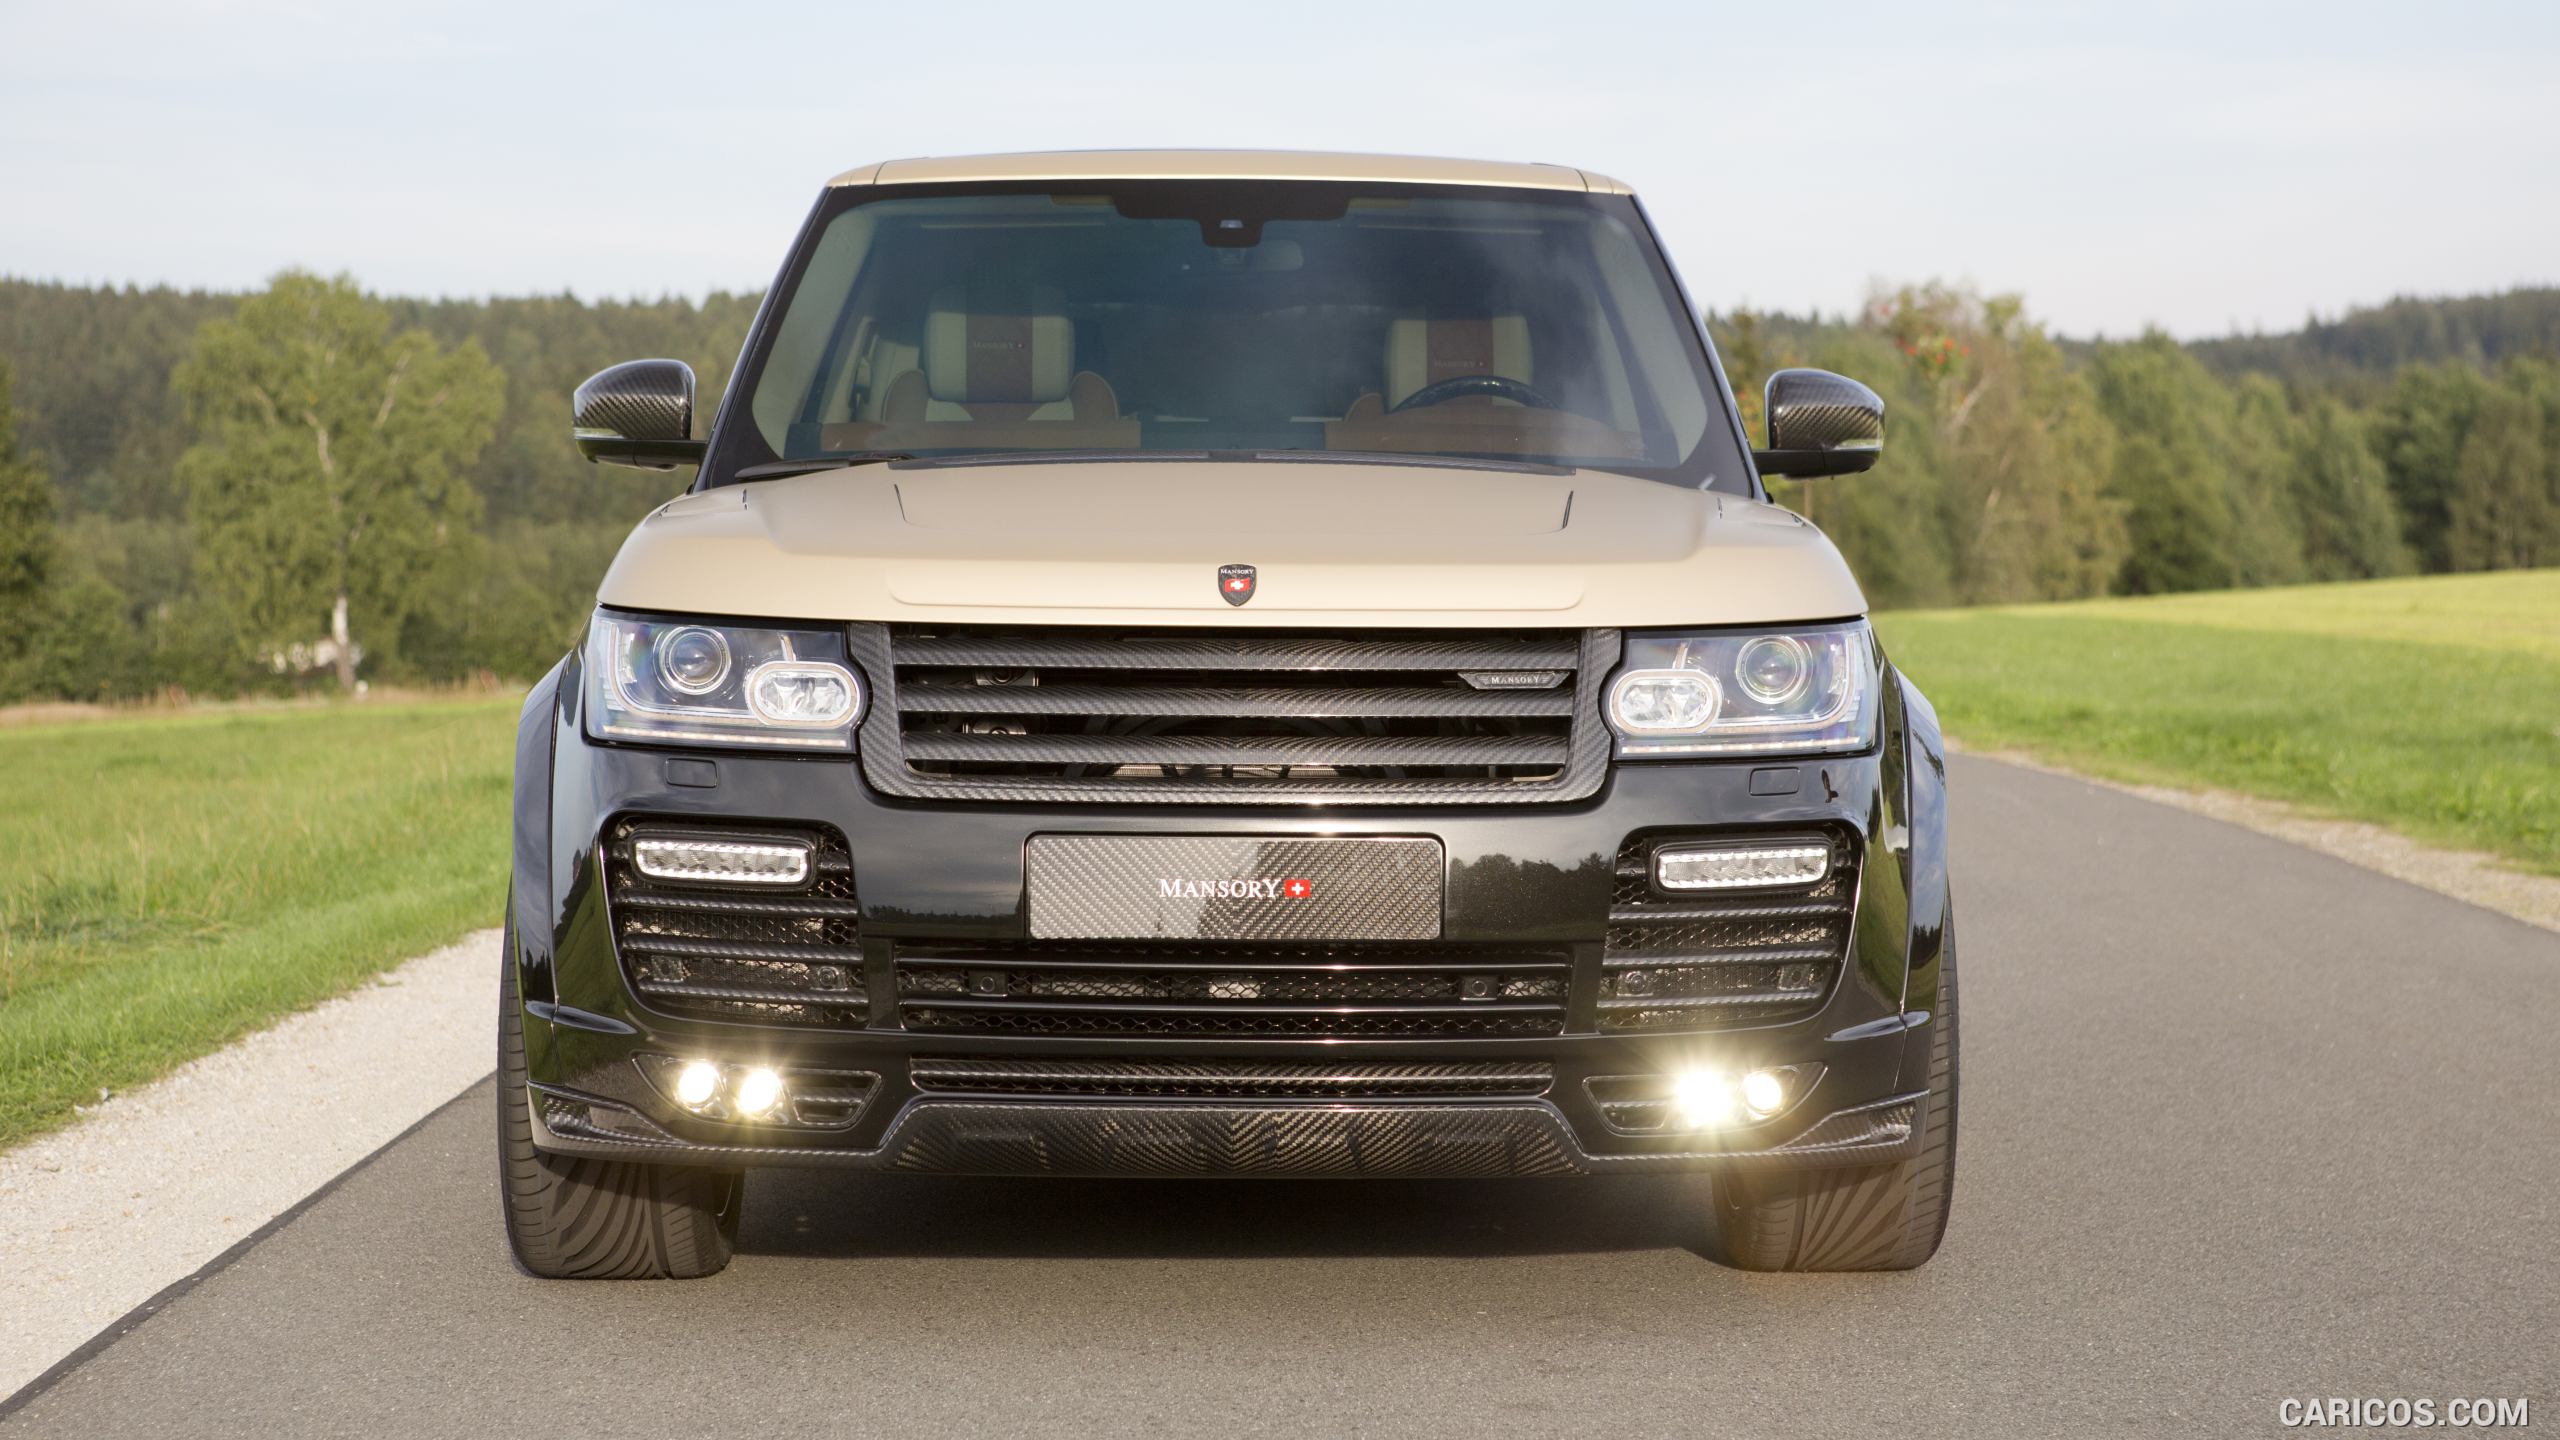 2016 MANSORY Range Rover Autobiography Extended - Front, #5 of 12